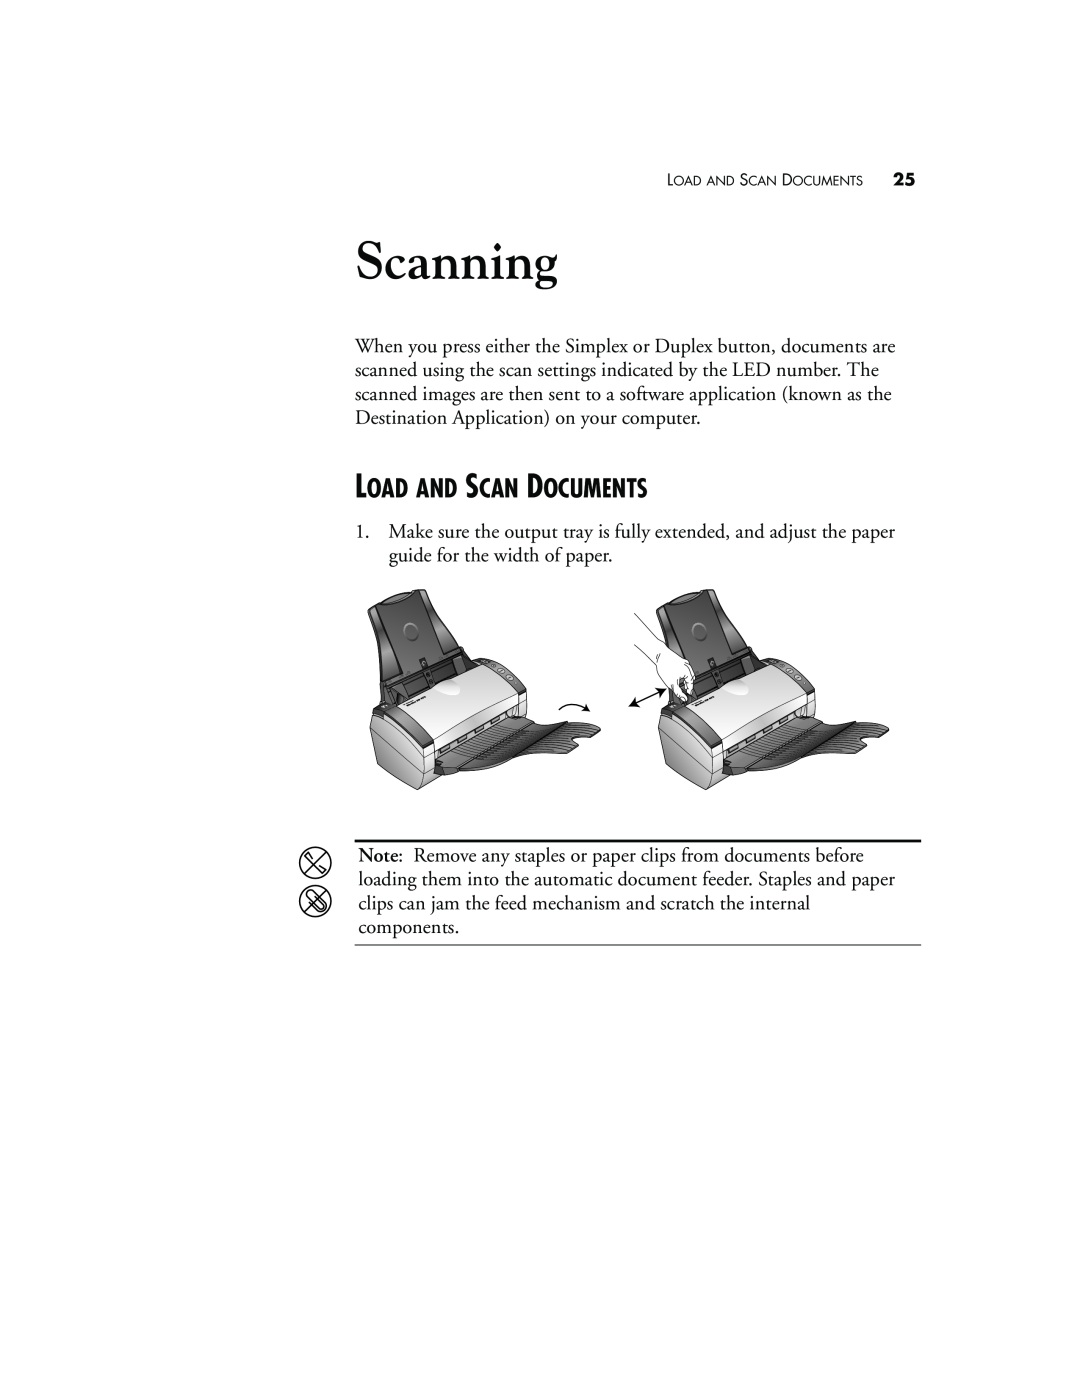 Visioneer XP 470 manual Scanning, Load And Scan Documents 